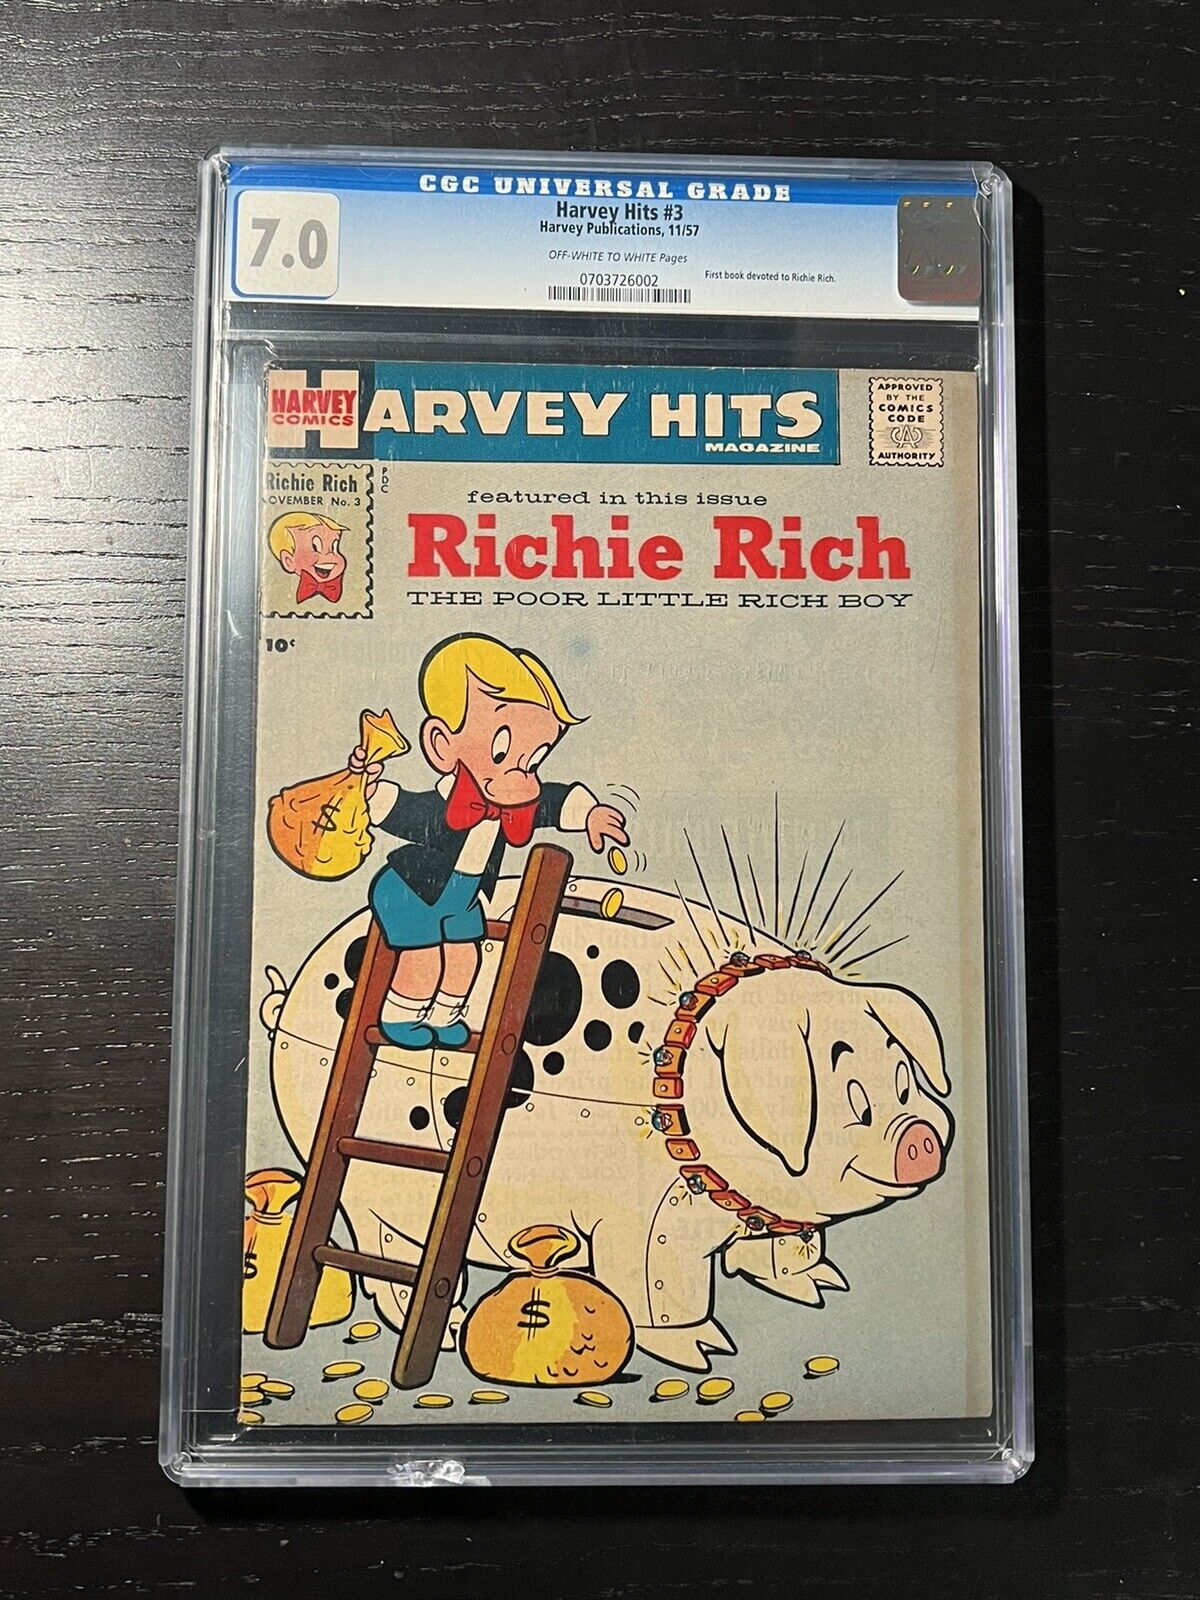 CGC 7.0 HARVEY HITS #3 NOVEMBER 1957 FIRST BOOK DEVOTED TO RICHIE RICH RARE BOOK